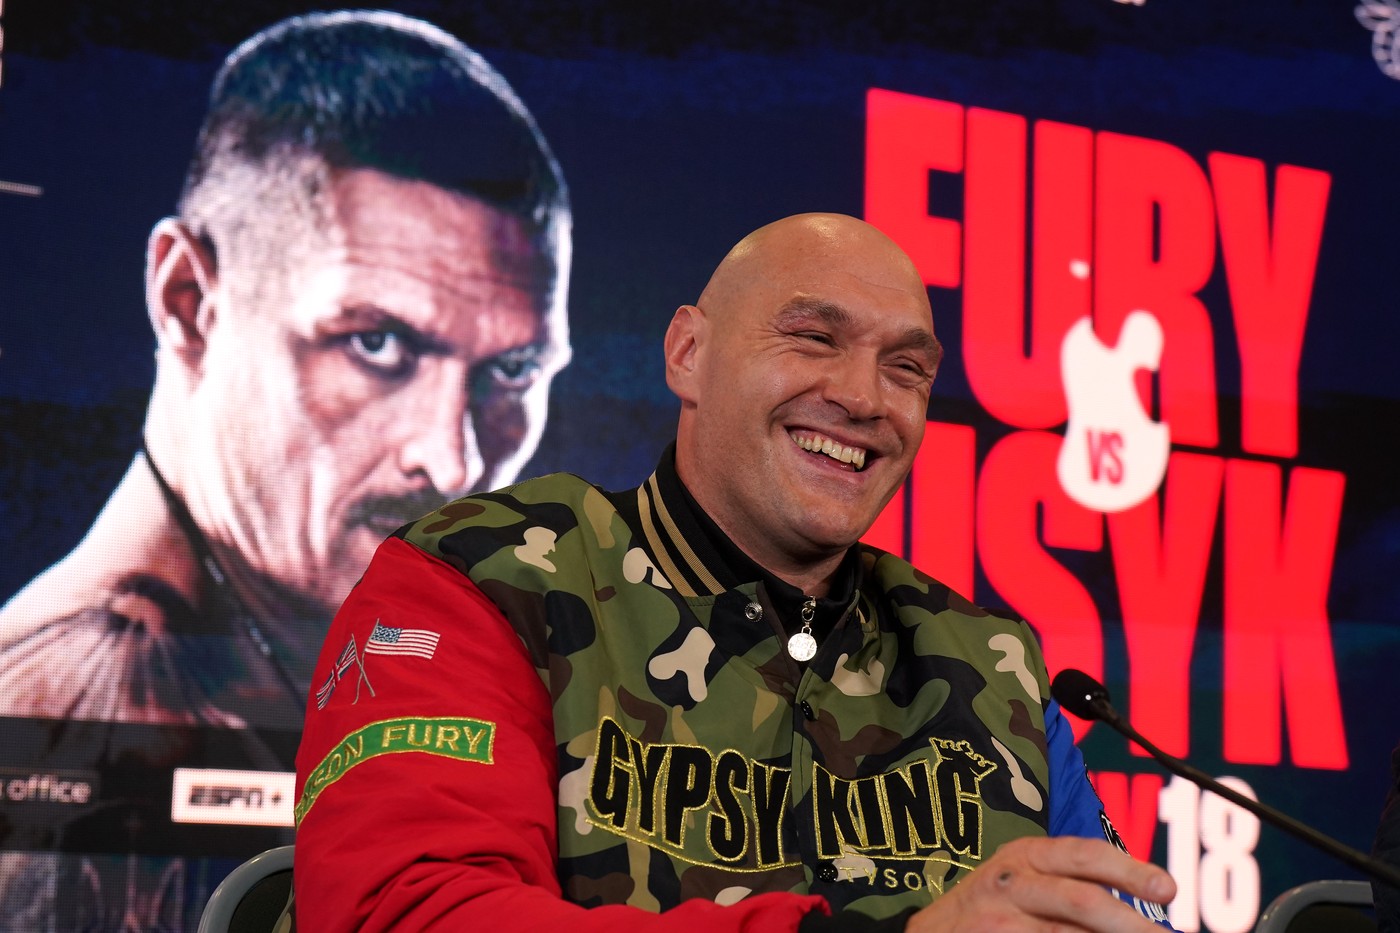 Tyson Fury during a press conference at the The Mazuma Mobile Stadium, Morecambe. Tyson Fury faces Oleksandr Usyk in the 'Ring of Fire' undisputed world heavyweight title fight in Riyadh, Saudi Arabia on 18 May 2024. Picture date: Wednesday April 10, 2024.,Image: 863797191, License: Rights-managed, Restrictions: Use subject to restrictions. Editorial use only, no commercial use without prior consent from rights holder., Model Release: no, Credit line: Owen Humphreys / PA Images / Profimedia